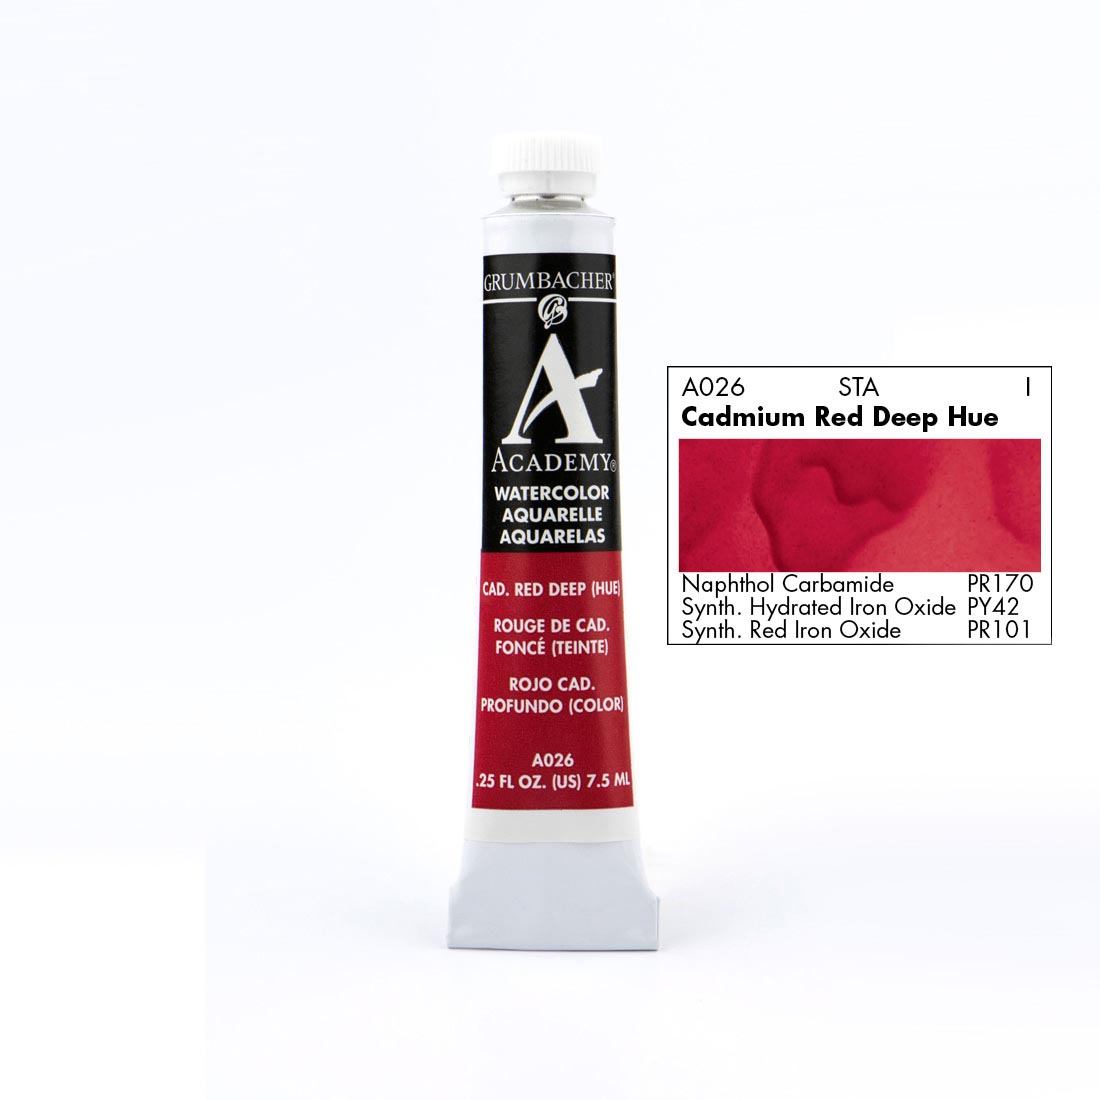 Tube of Grumbacher Academy Watercolor beside Cadmium Red Deep Hue color swatch